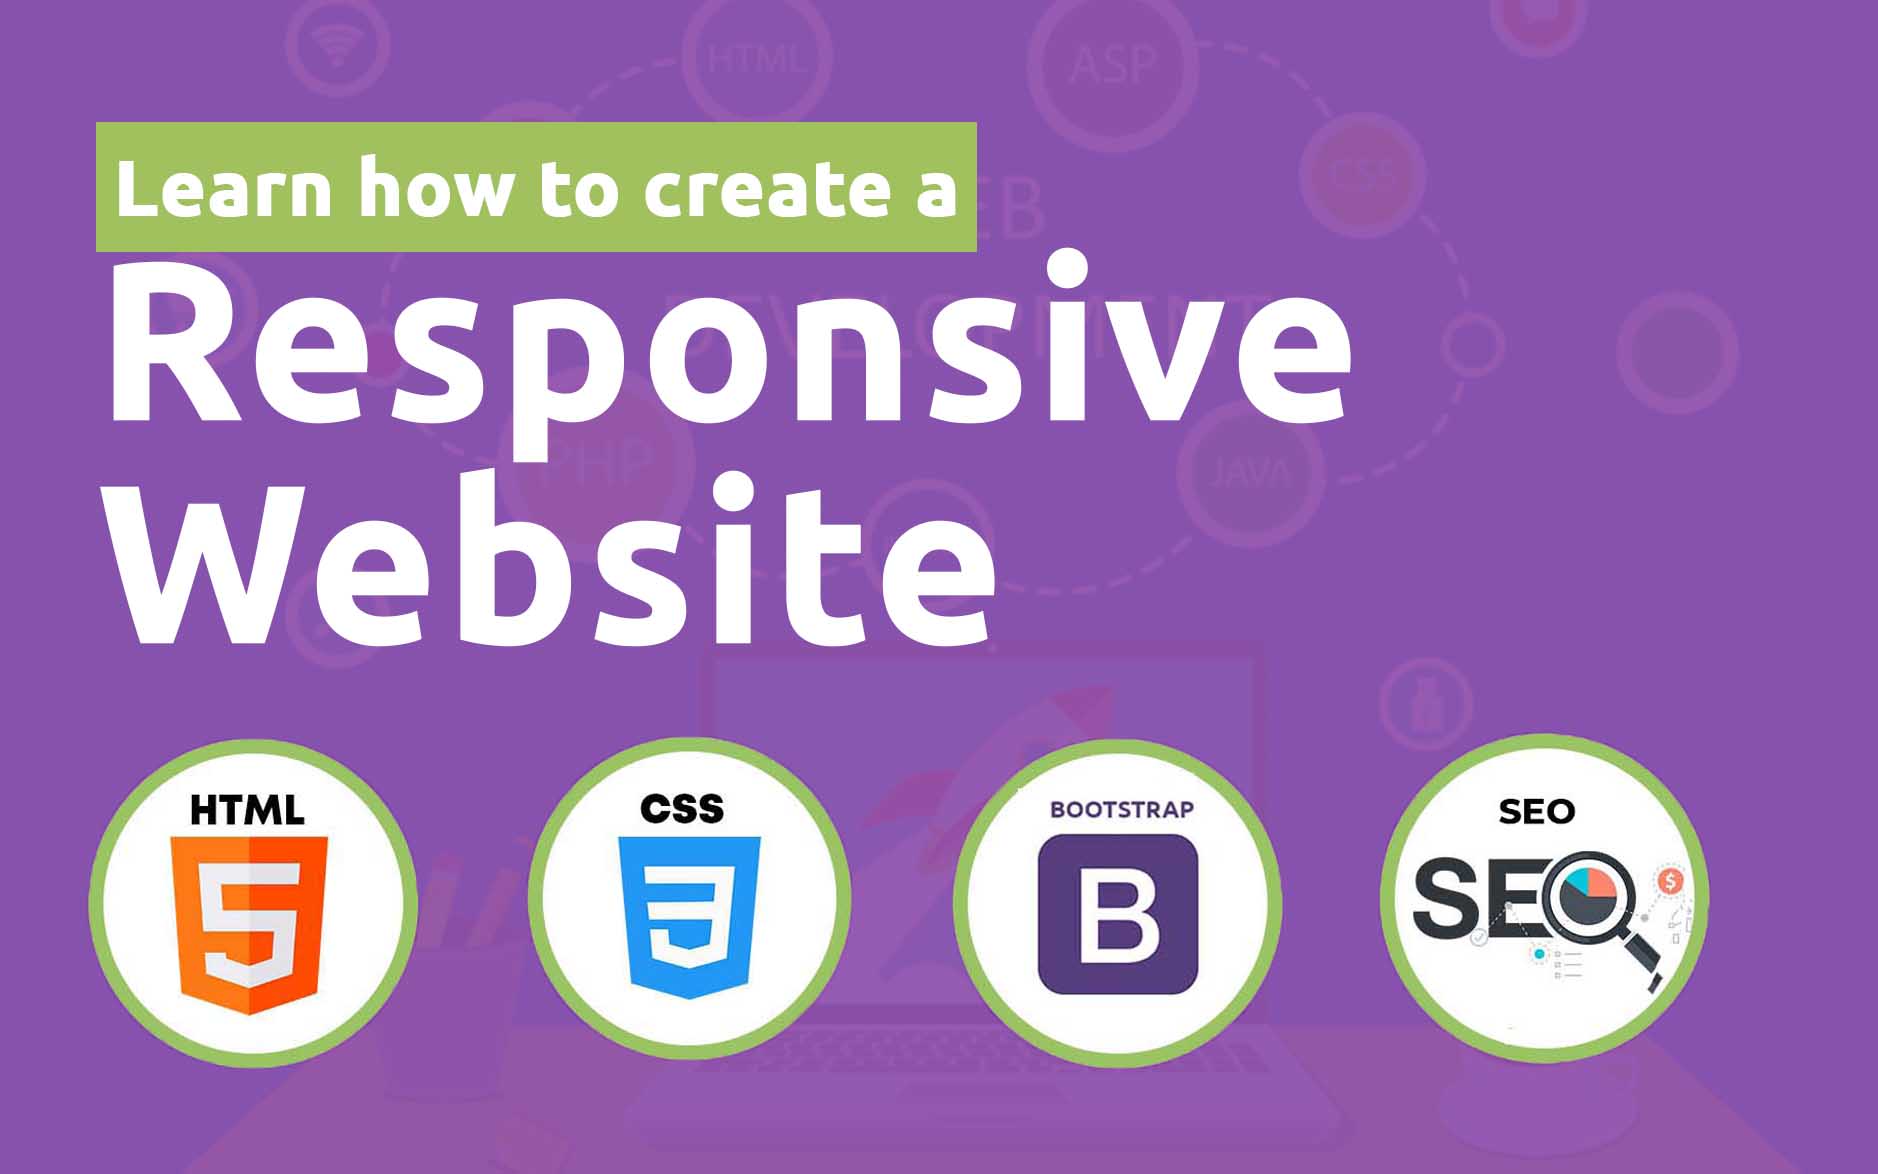 Responsive website Development|Age 18 and Above (HTML+CSS+ Bootstrap+ SEO)